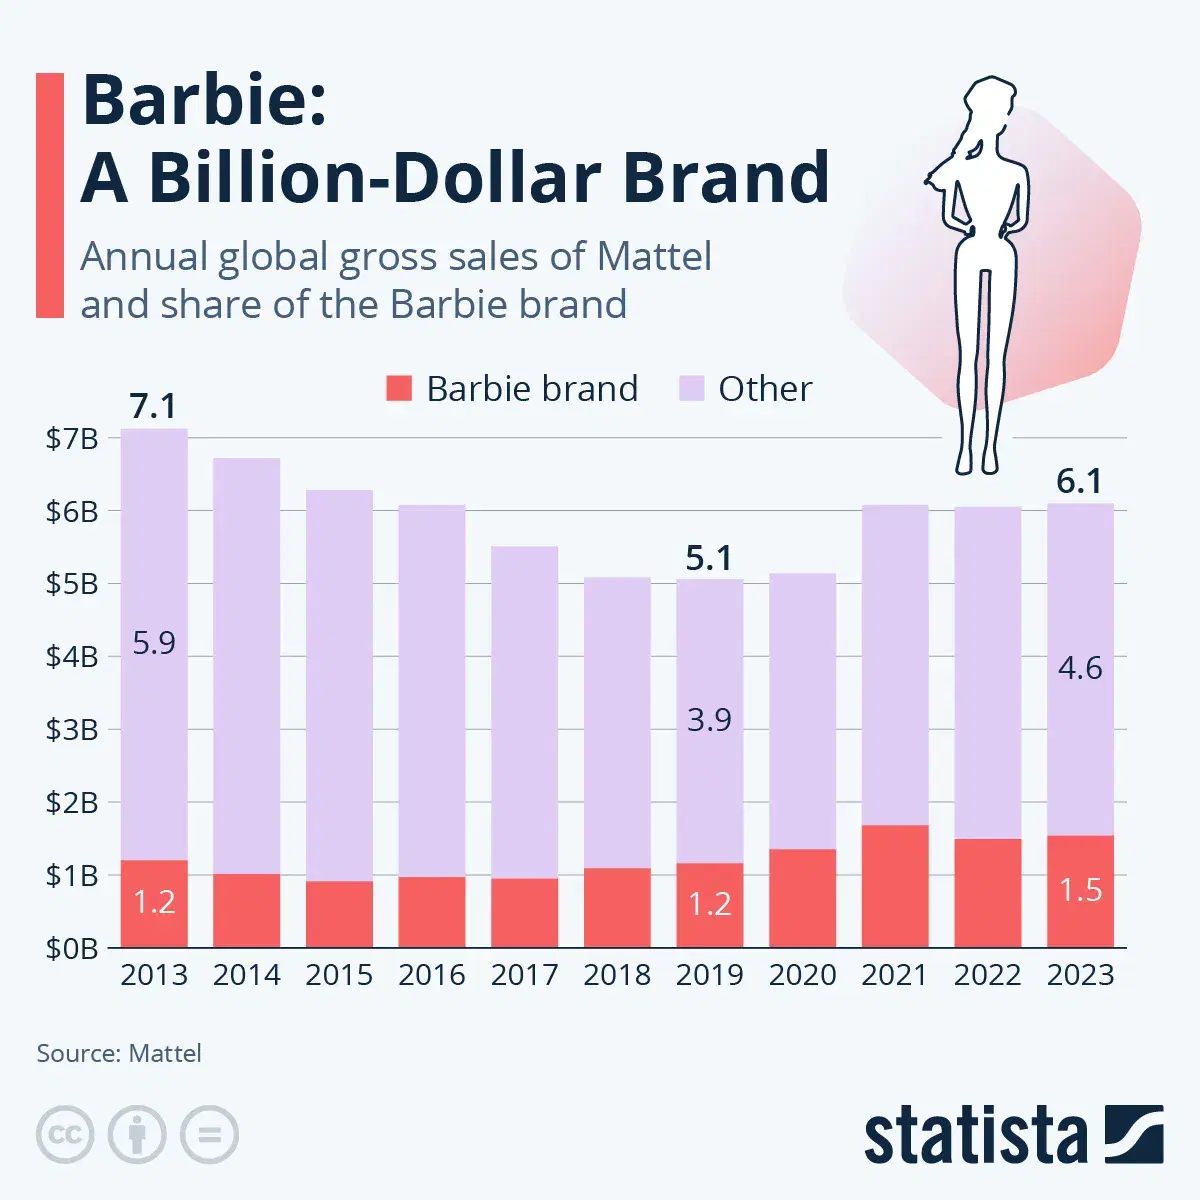 How Important Is the Barbie Brand for Mattel?